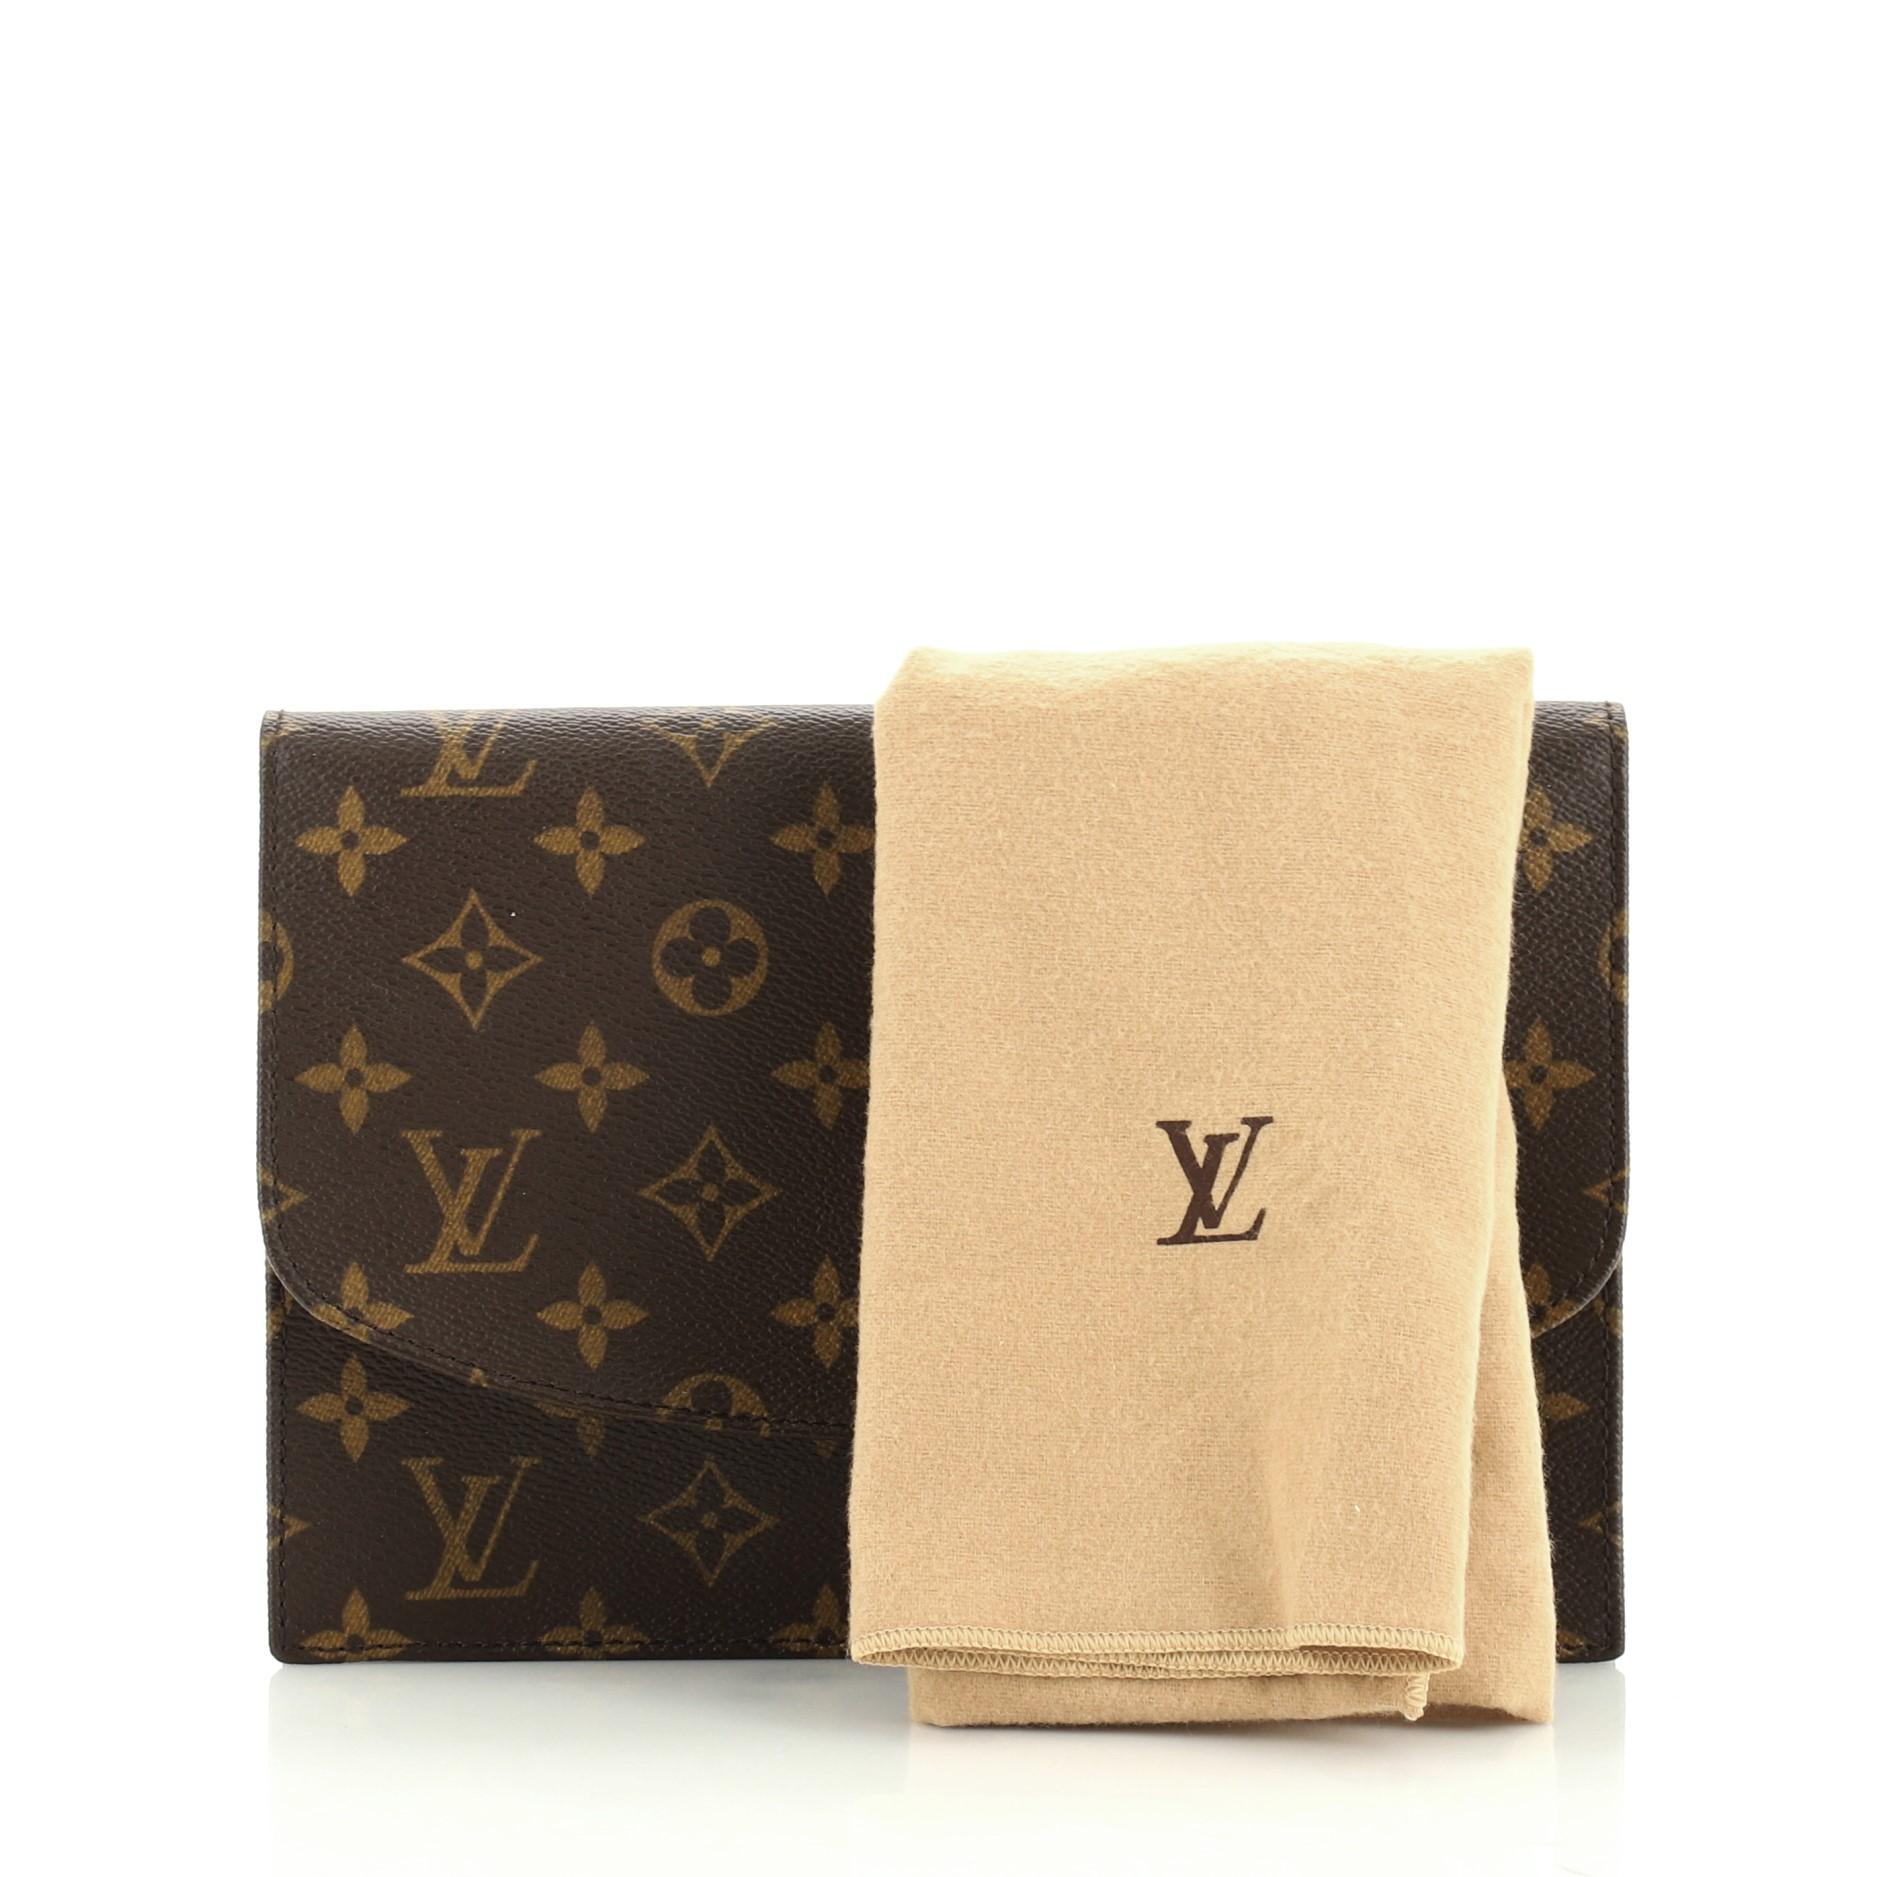 Condition: Very good. Minor wear on base corners and in interior, splitting on side opening wax edges. Small mark and bubbling underneath flap, scratches on hardware.
Accessories: Dust Bag
Measurements:
Designer: Louis Vuitton
Model: Pochette Rabat